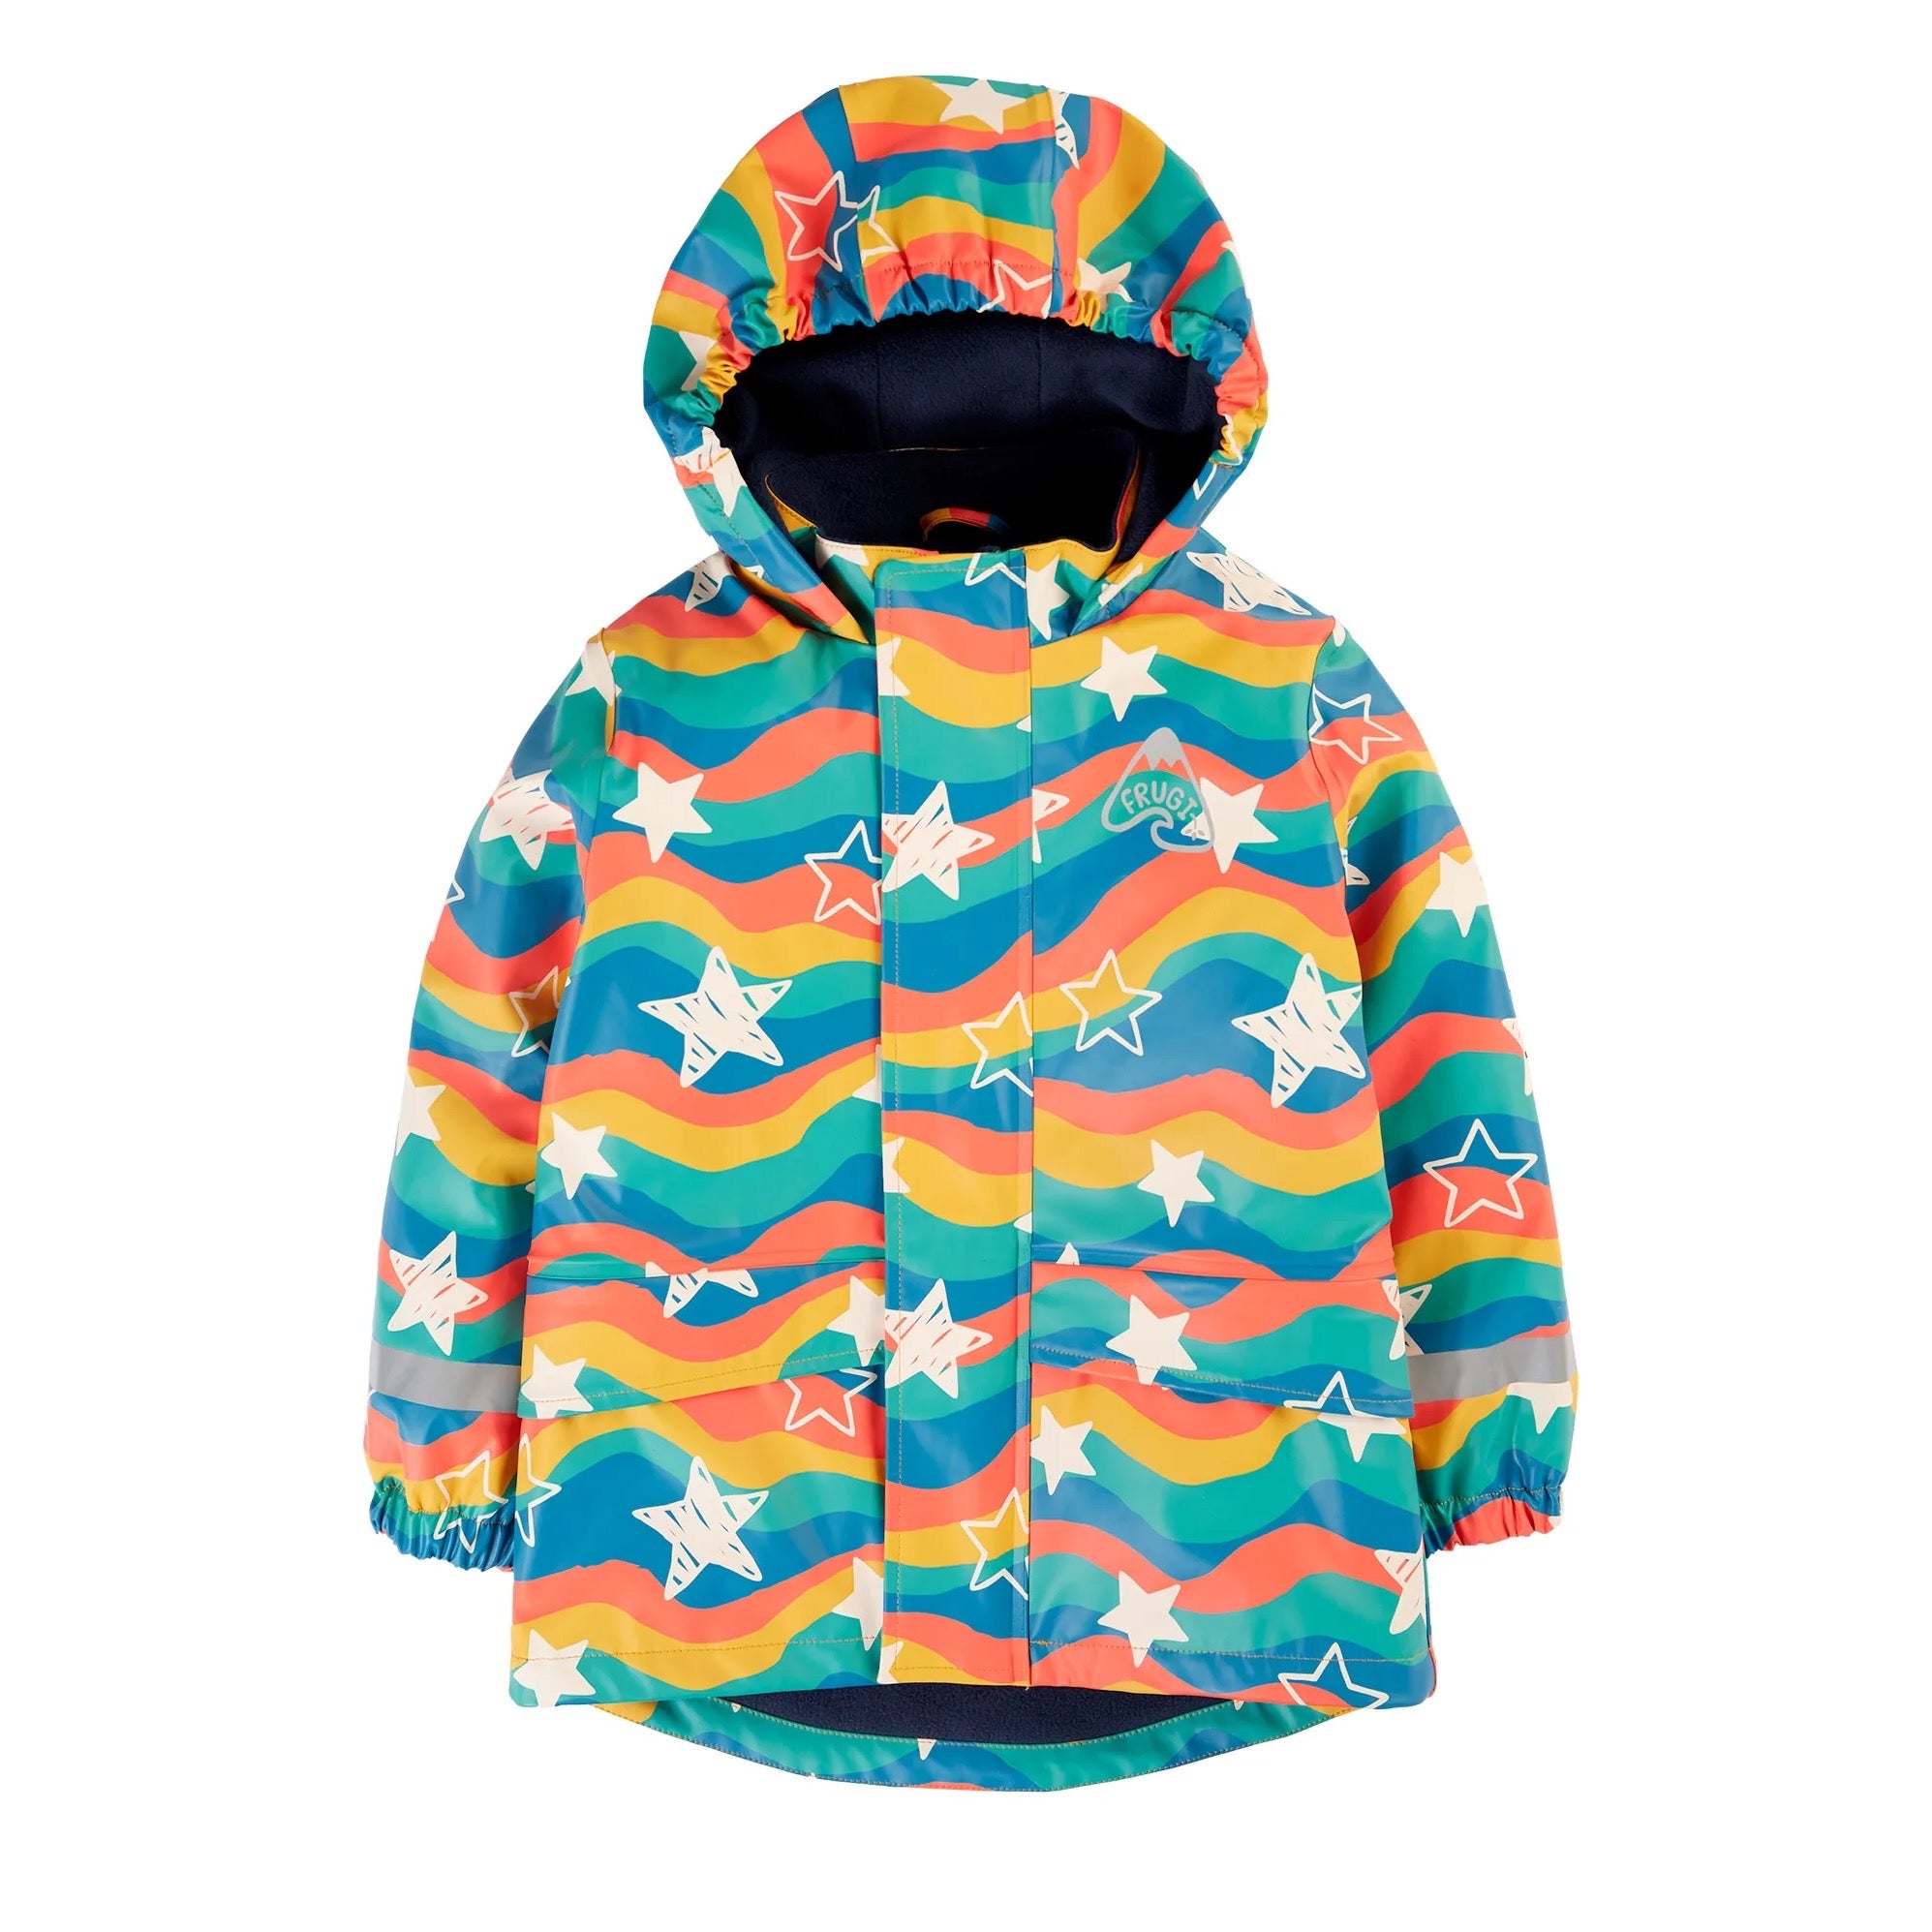 Frugi Puddle Buster Raincoat 500050A4wvst Wavy Stars